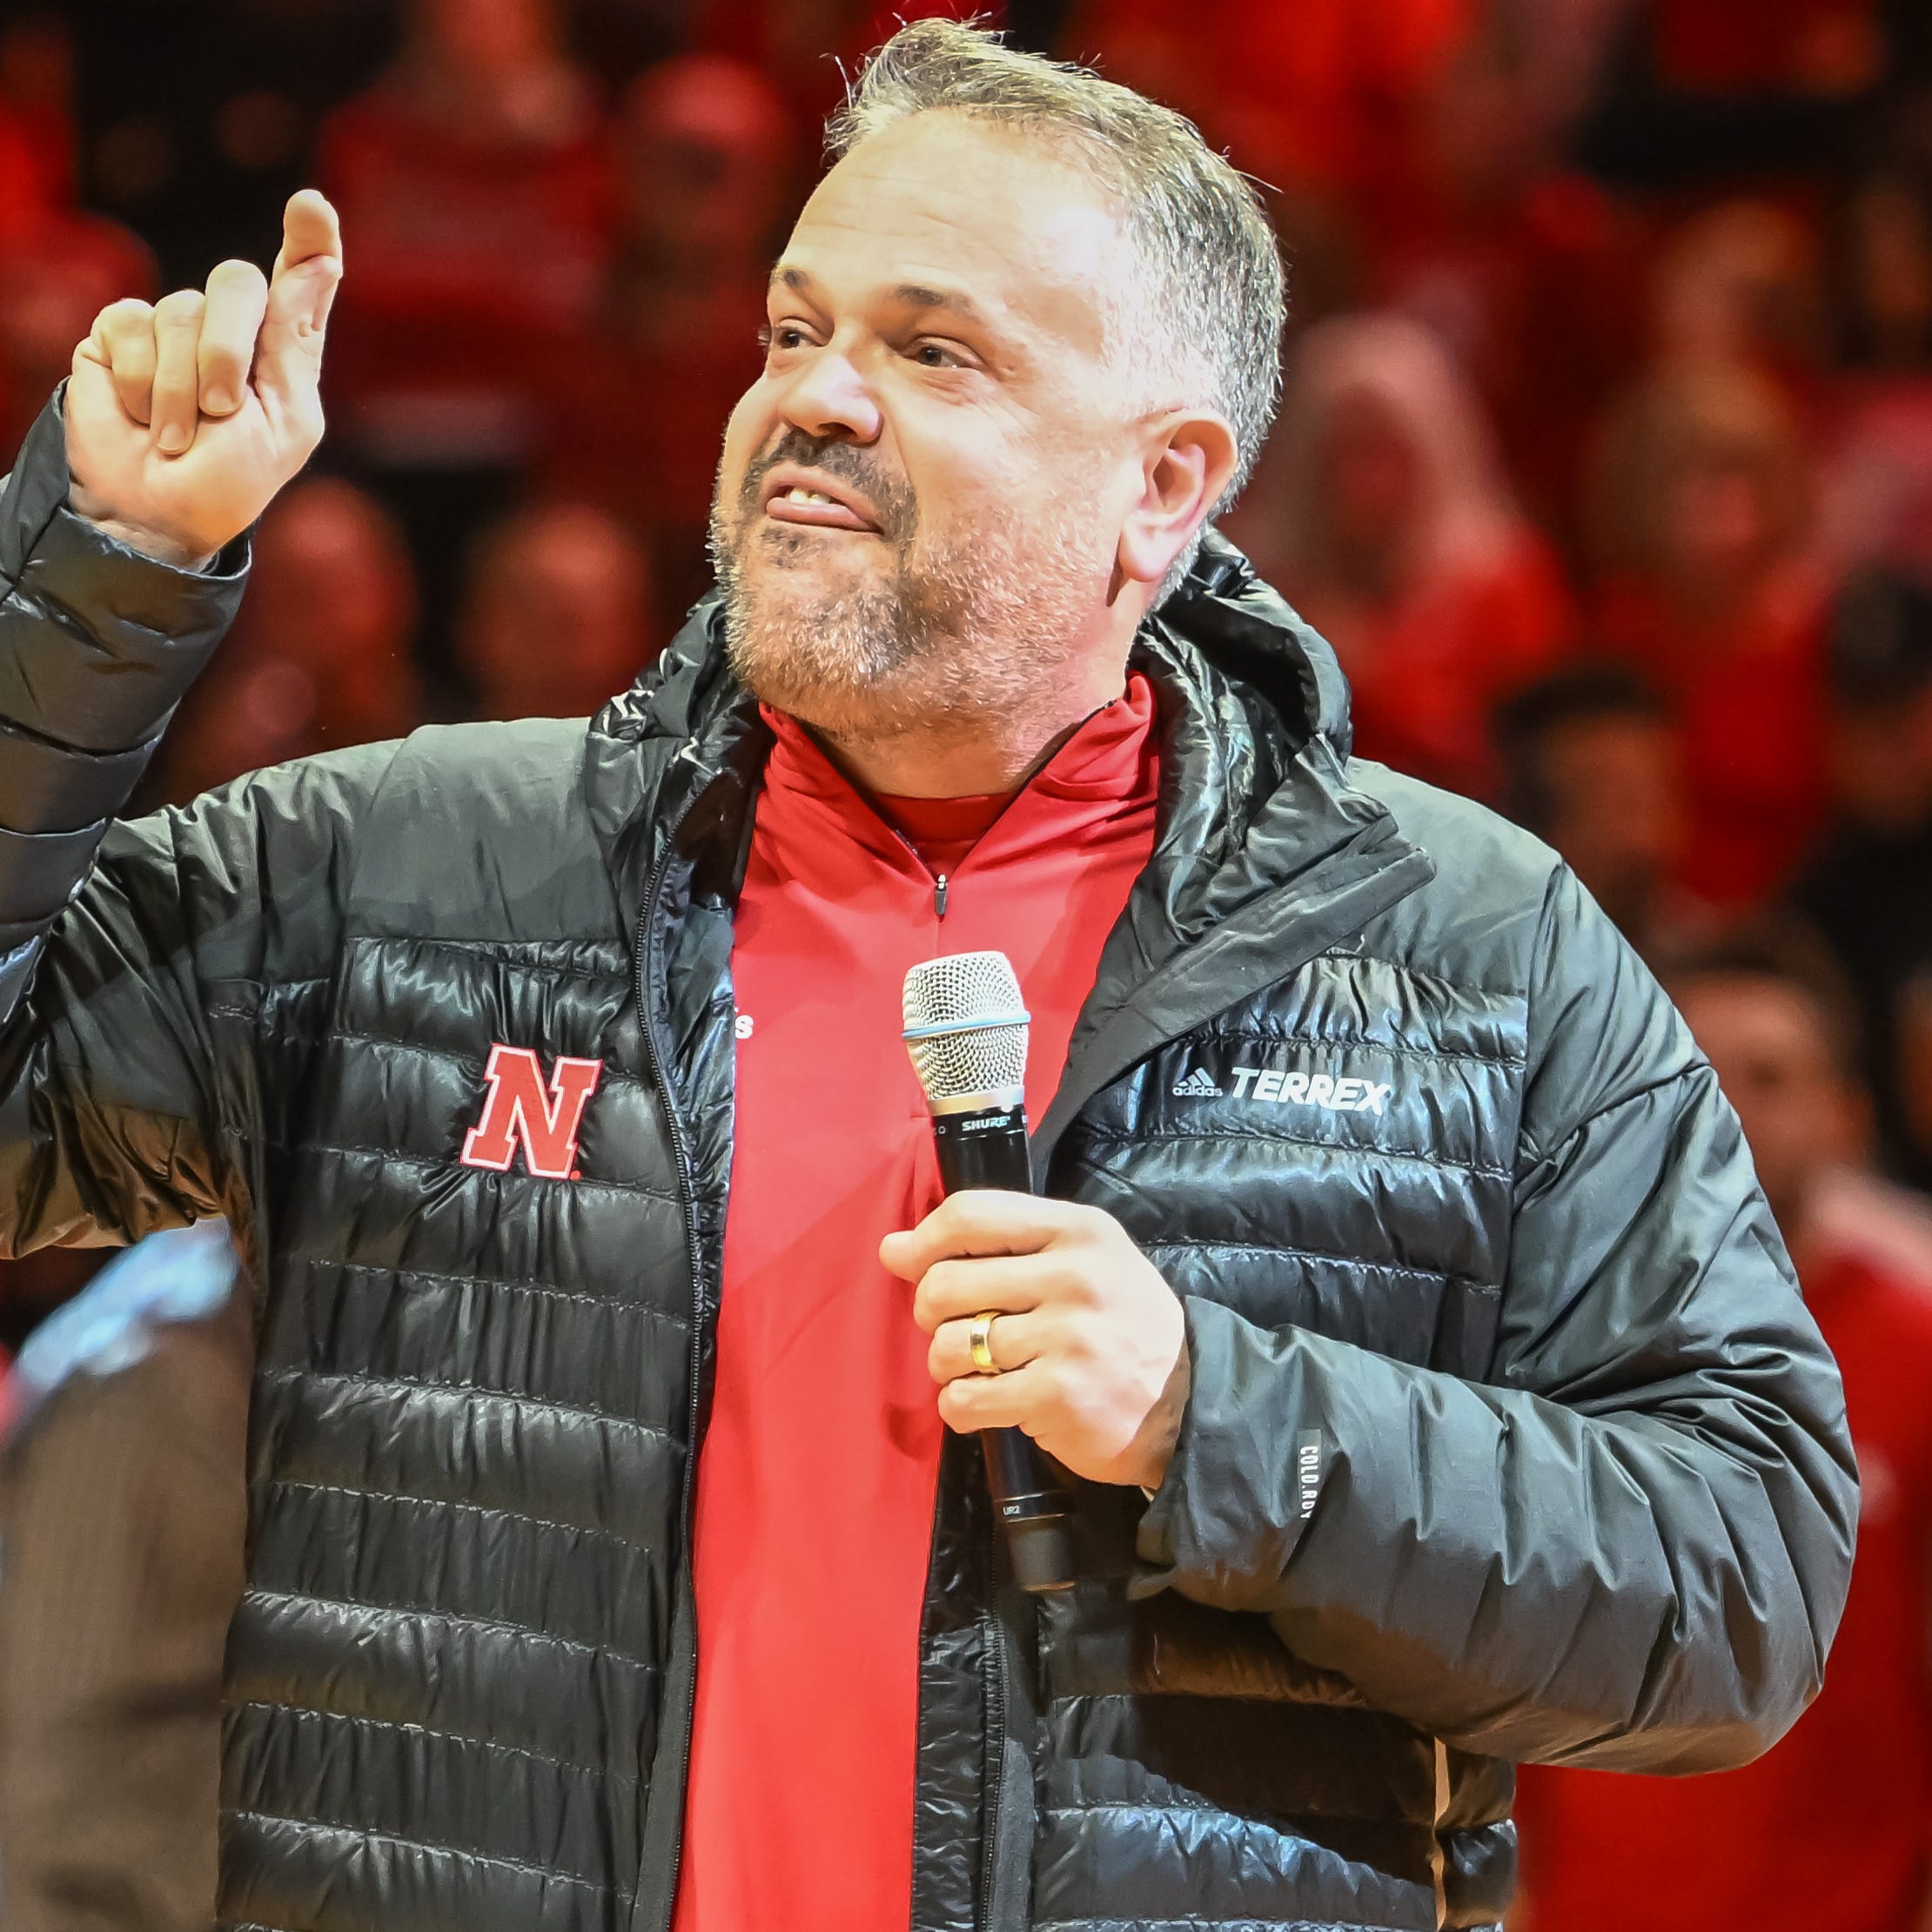 Nebraska football coach Matt Rhule talks to the crowd during halftime of the the school's men's basketball game against Purdue at Pinnacle Bank Arena.